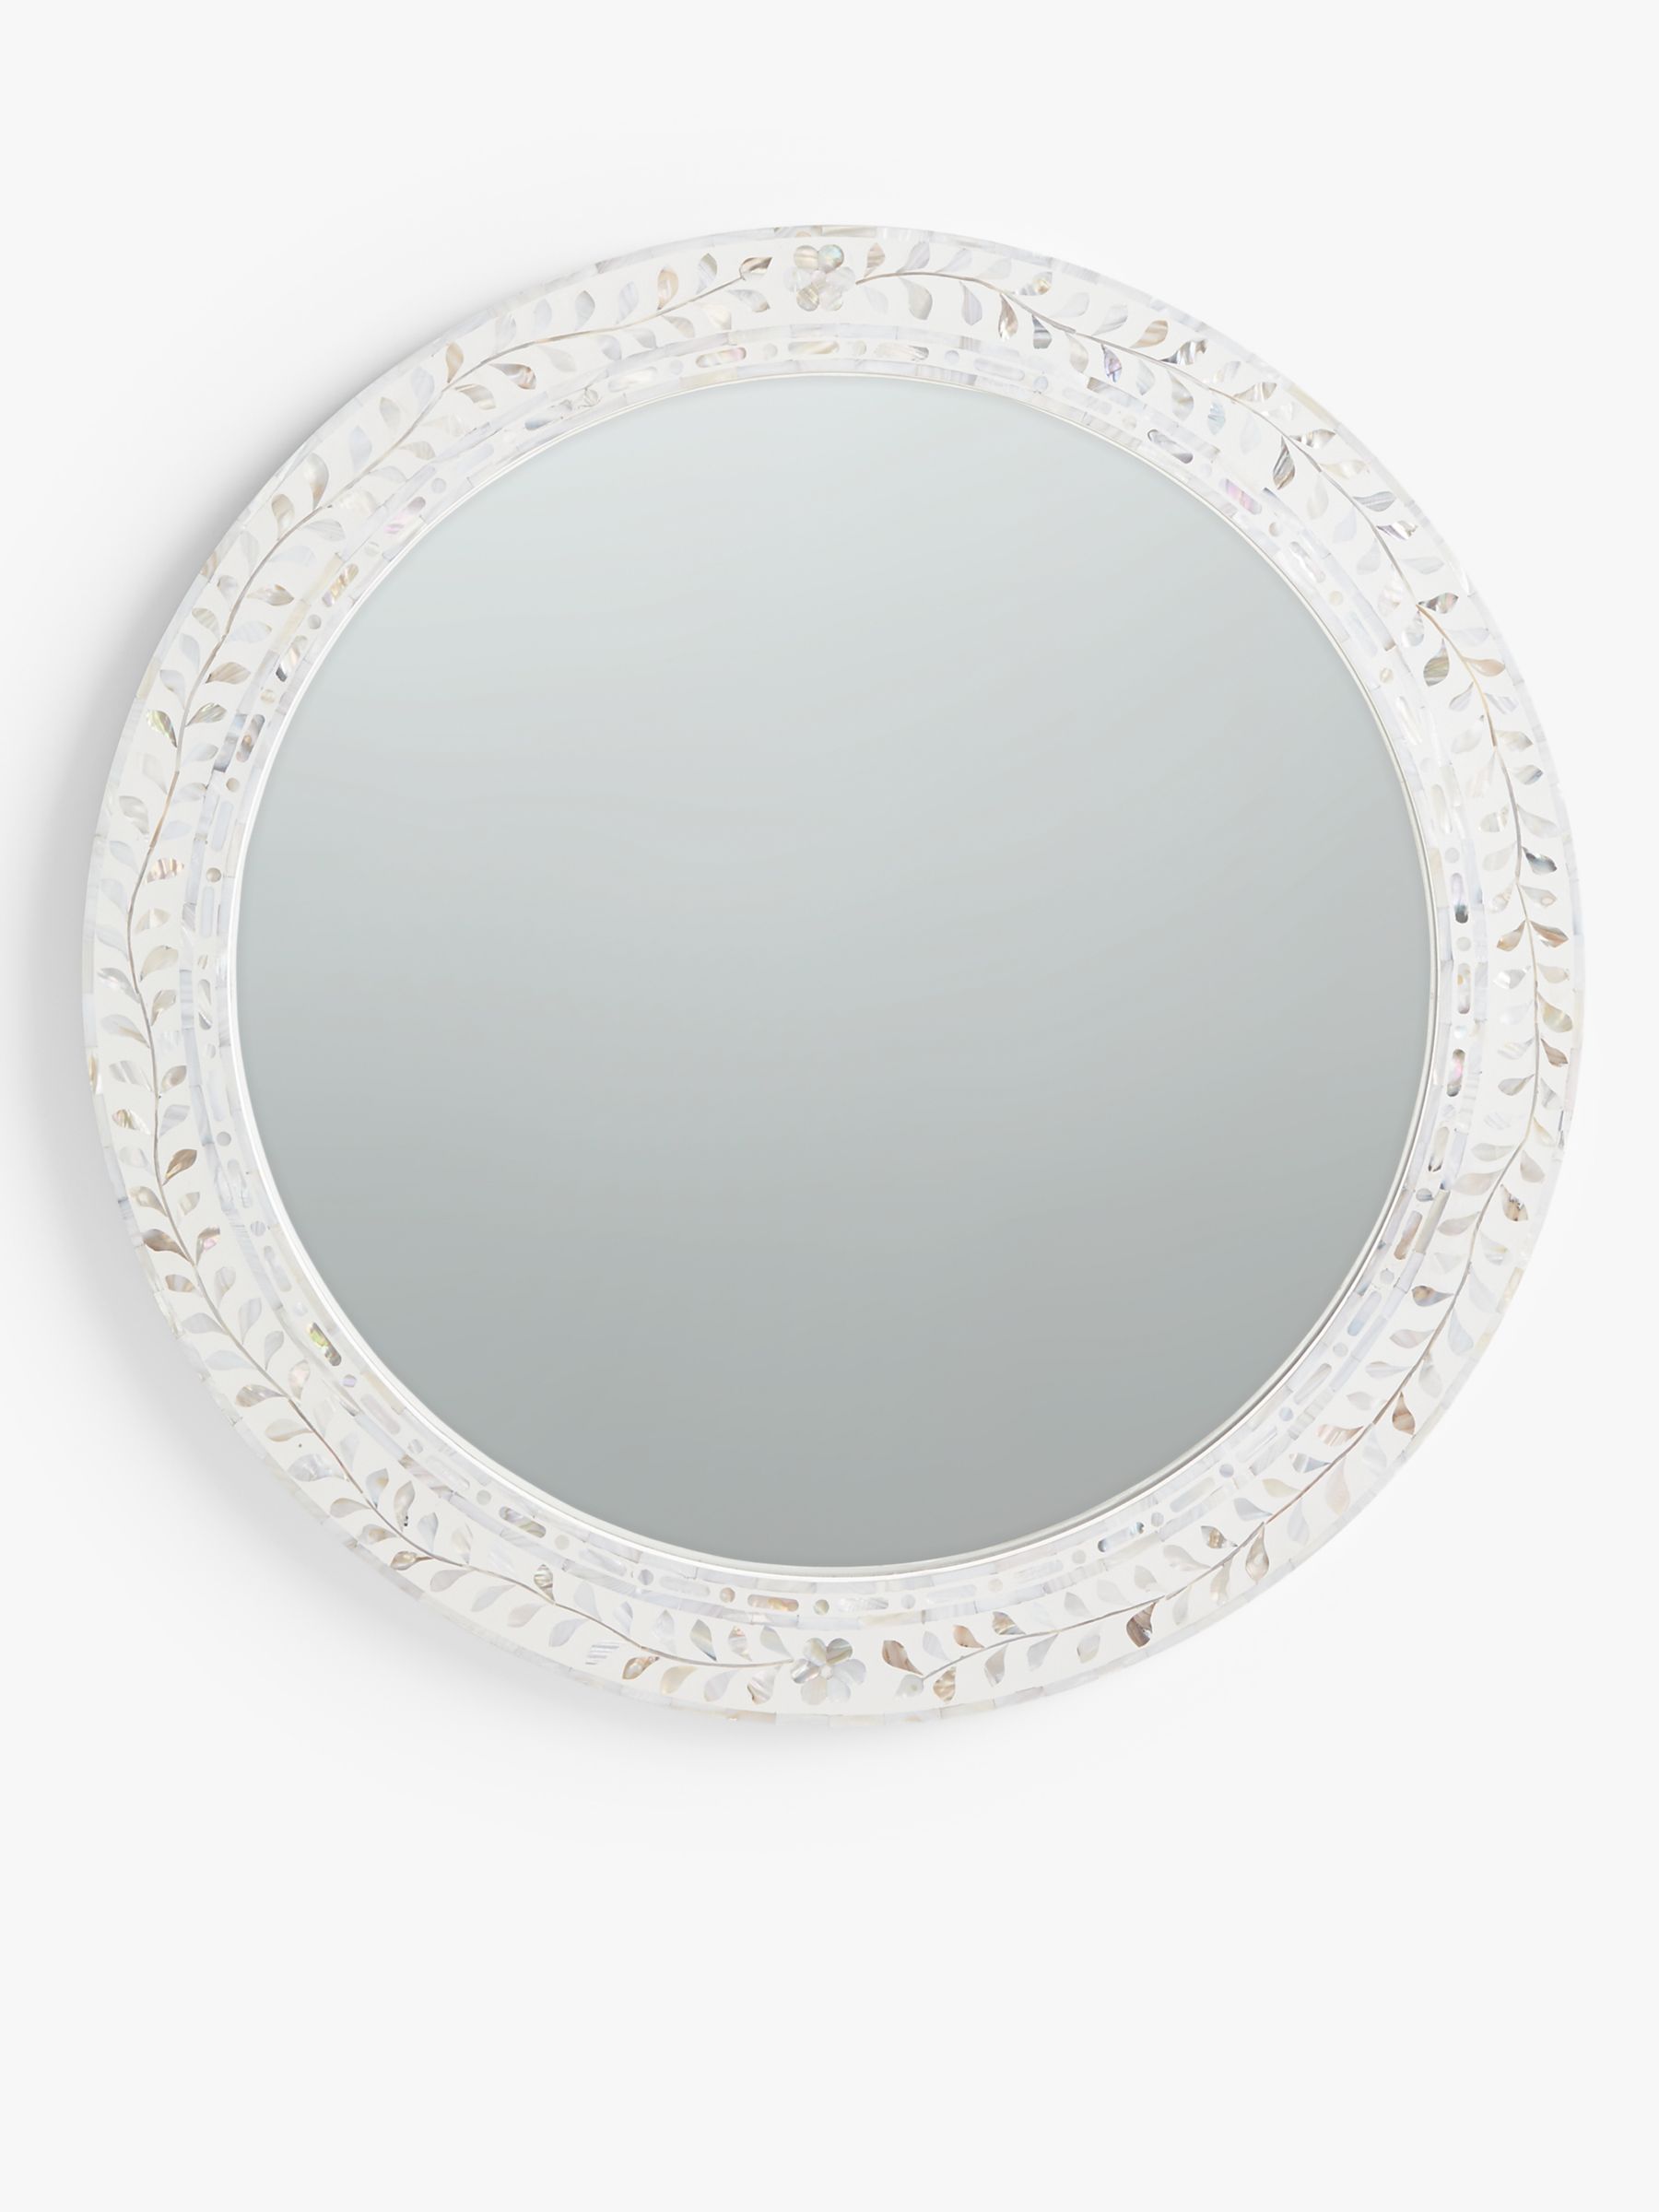 Mother Of Pearl Leaves Round Wall Mirror, Large Round Mother Of Pearl Mirror